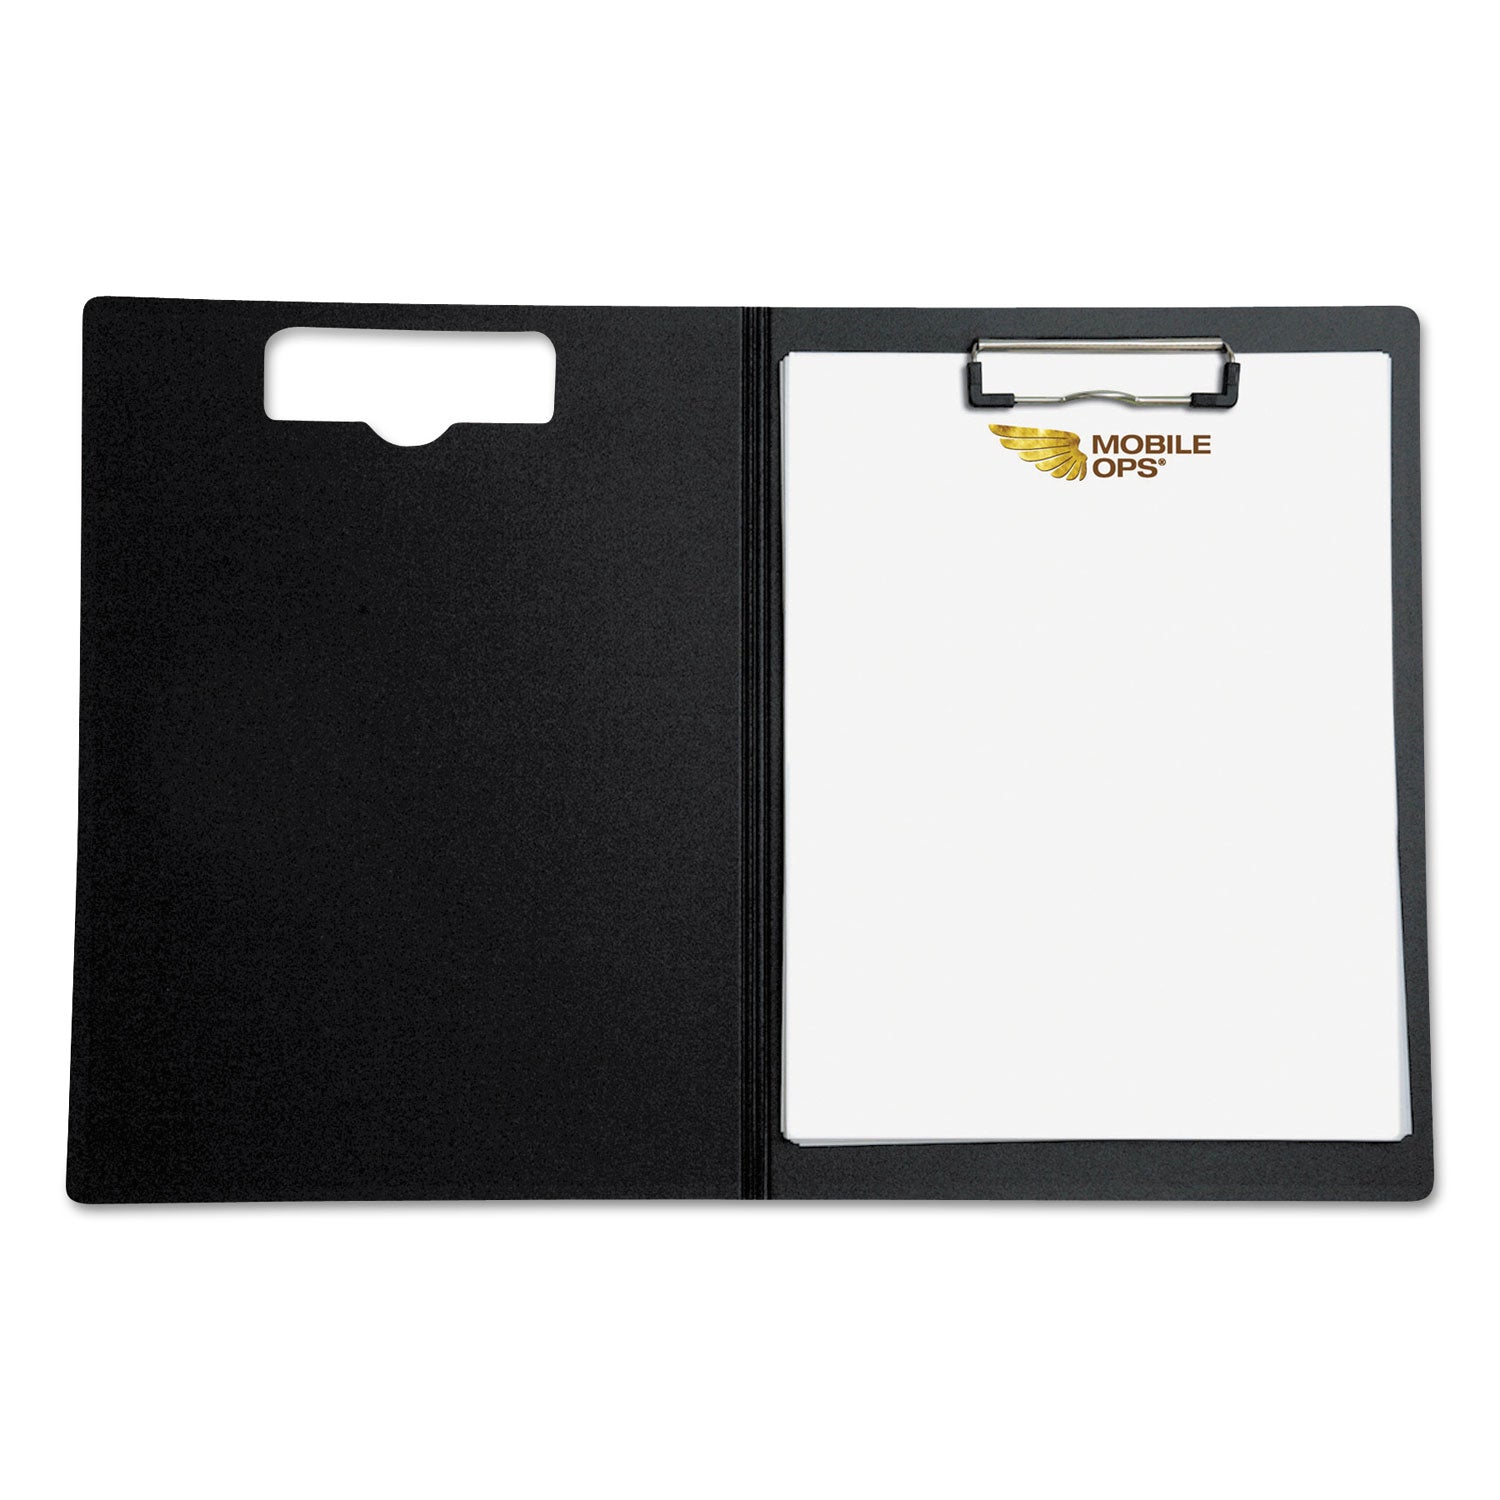 Portfolio Clipboard with Low-Profile Clip, Portrait Orientation, 0.5" Clip Capacity, Holds 8.5 x 11 Sheets, Red - 